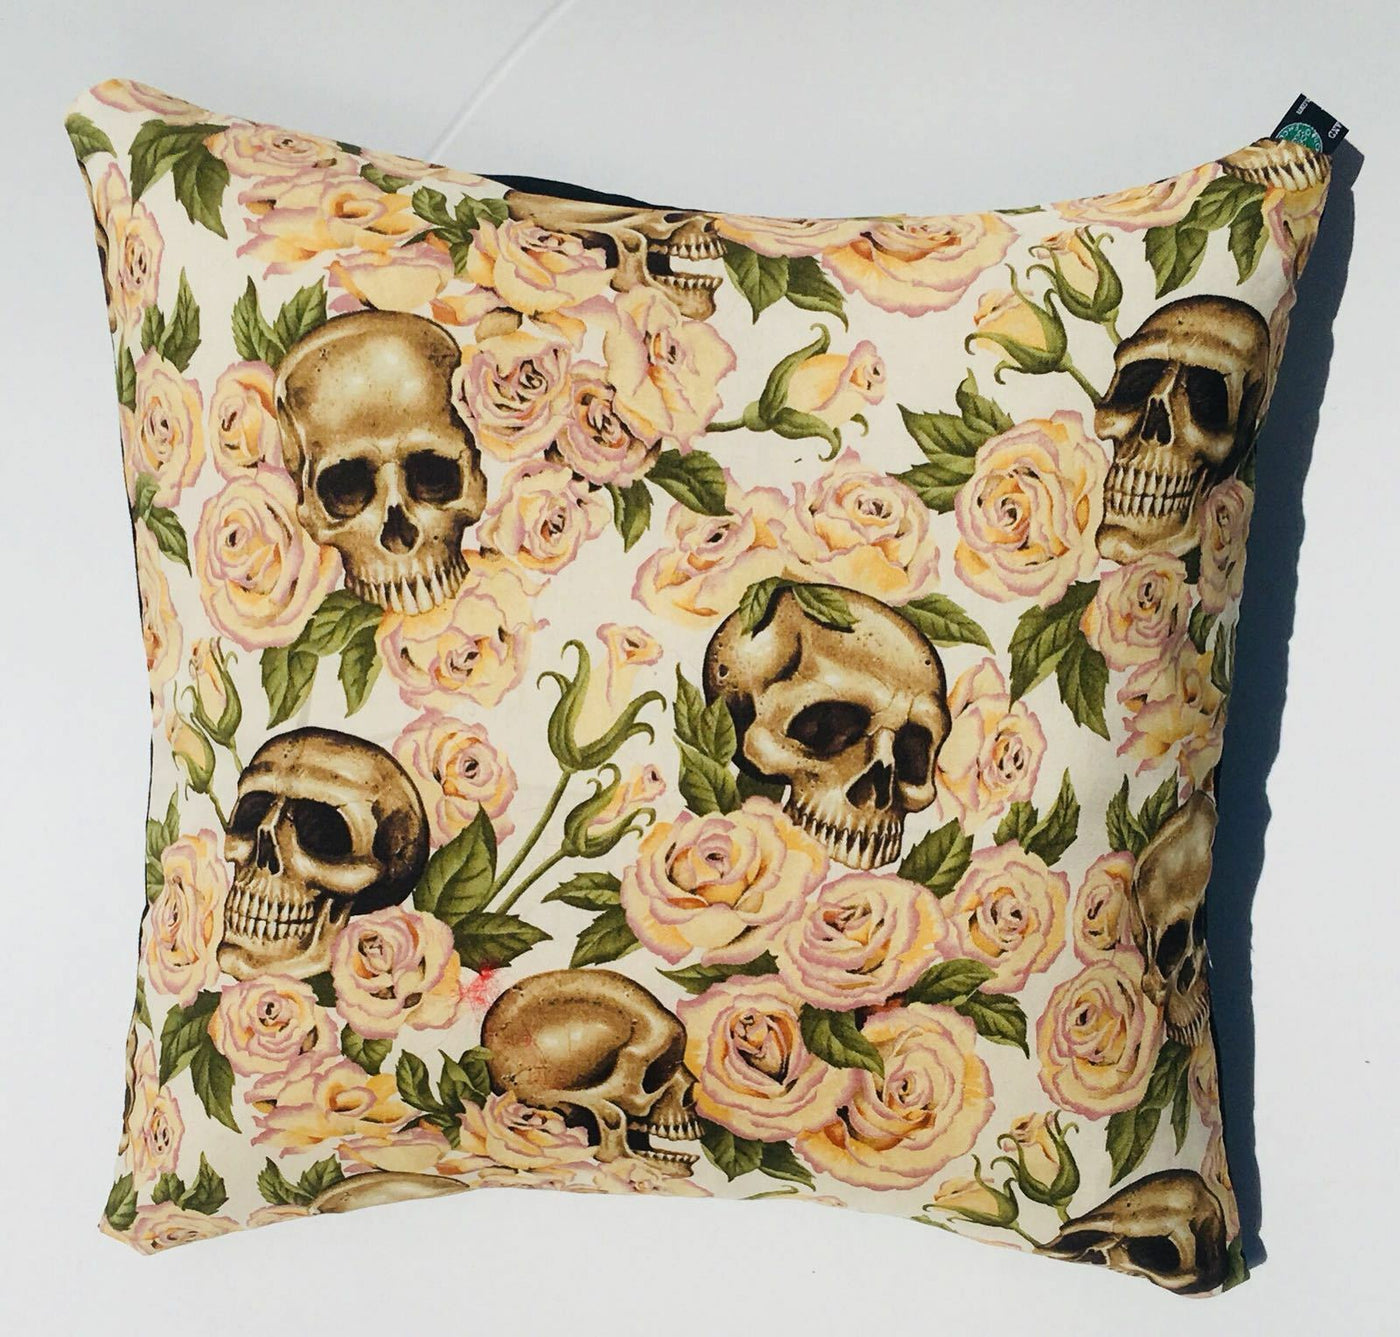 Skull & Ivory Roses Cushion Cover Sofa Decorative Trendy Case to fit 18 x 18